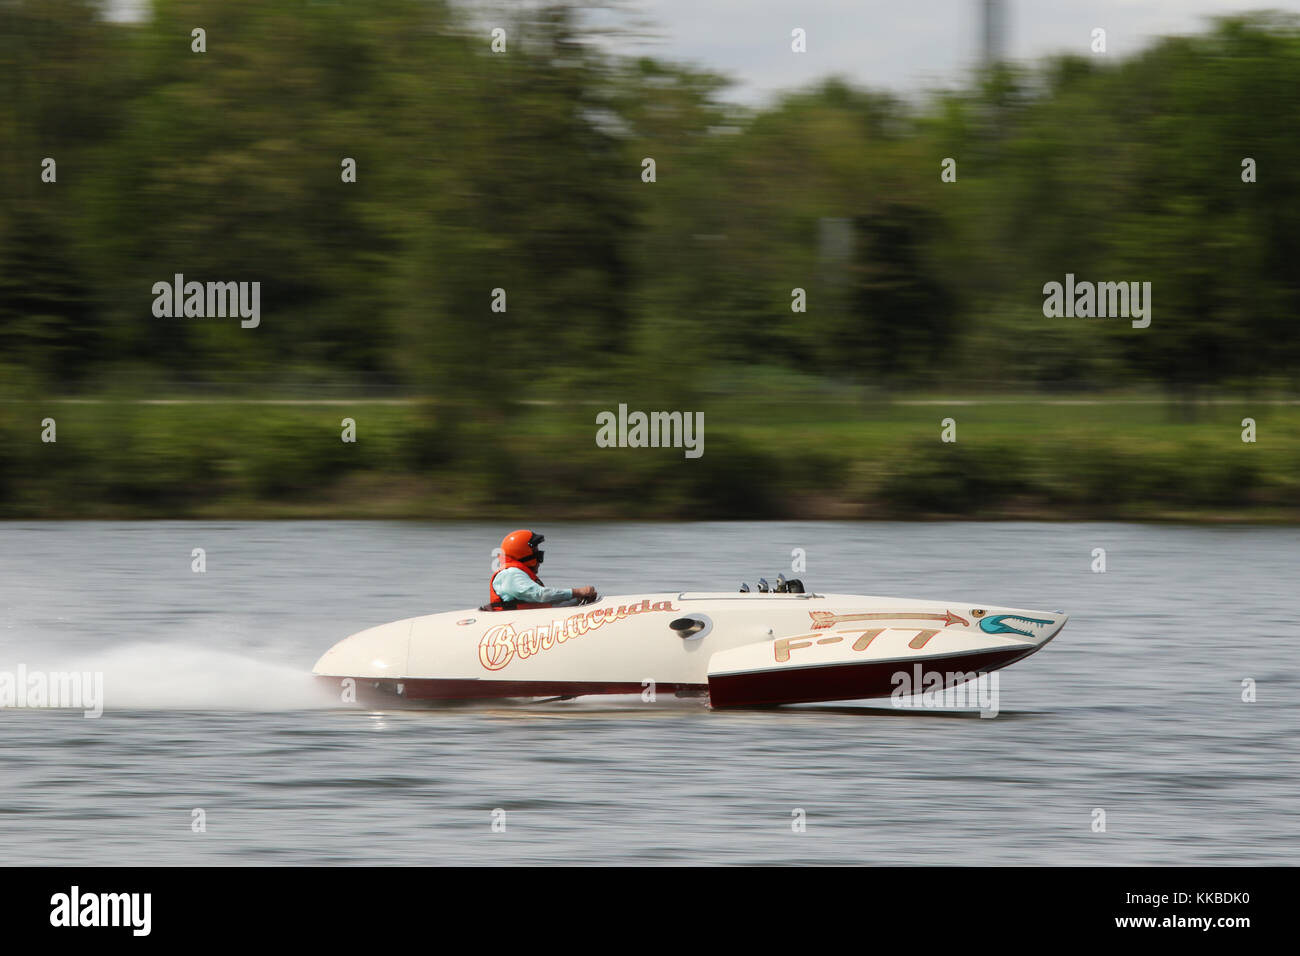 Race Boat F77, Barracuda. 2017 APBA, American Power Boat Association, Test and Tune day at Eastwood Lake, Dayton, Ohio, USA. 29 April 2017. Stock Photo